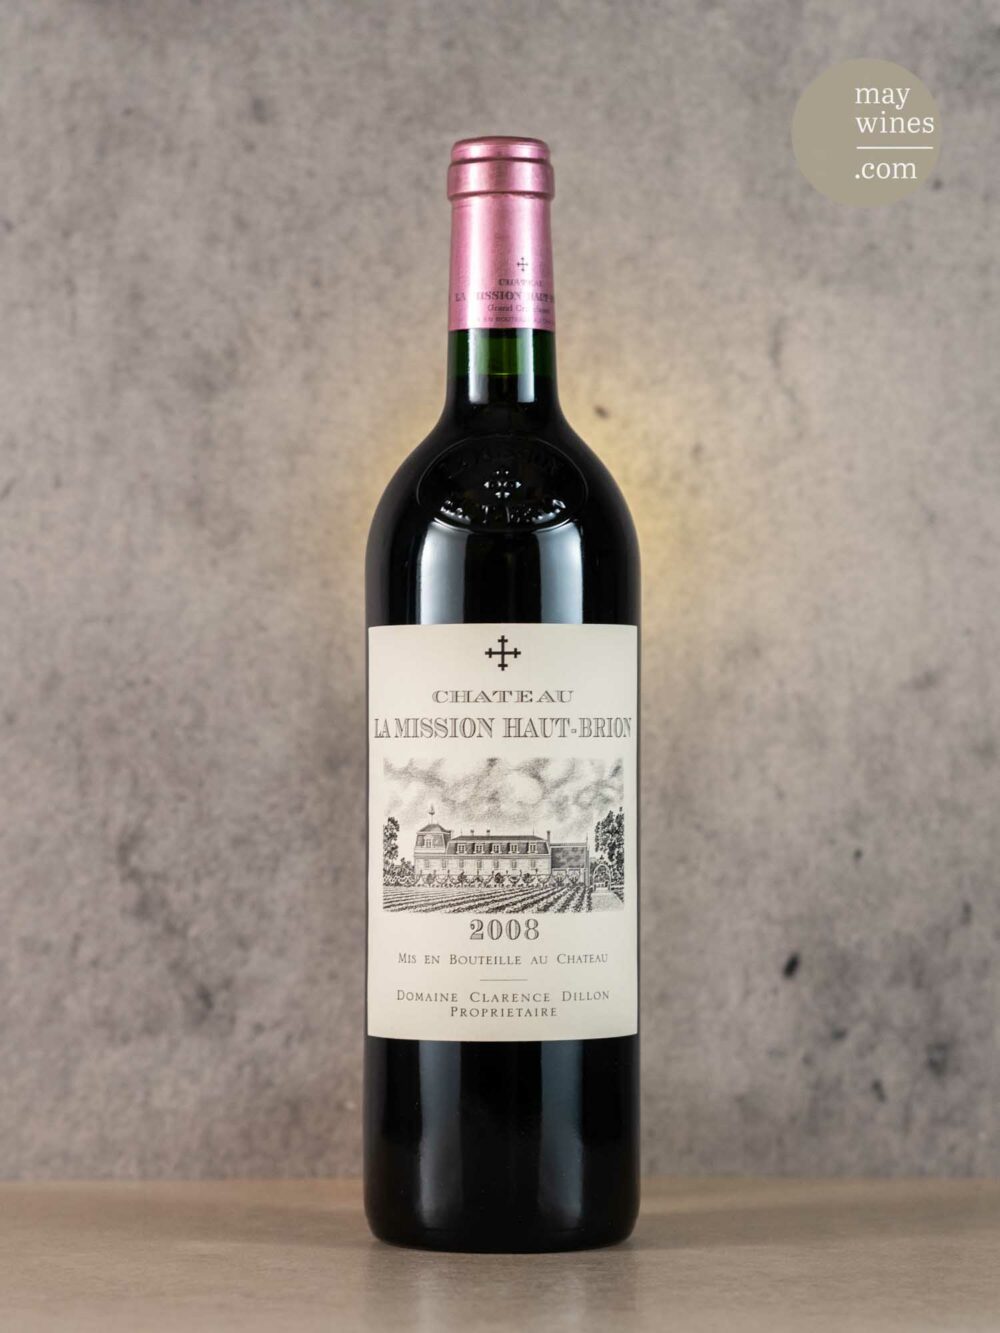 May Wines – Rotwein – 2008 Château La Mission Haut-Brion